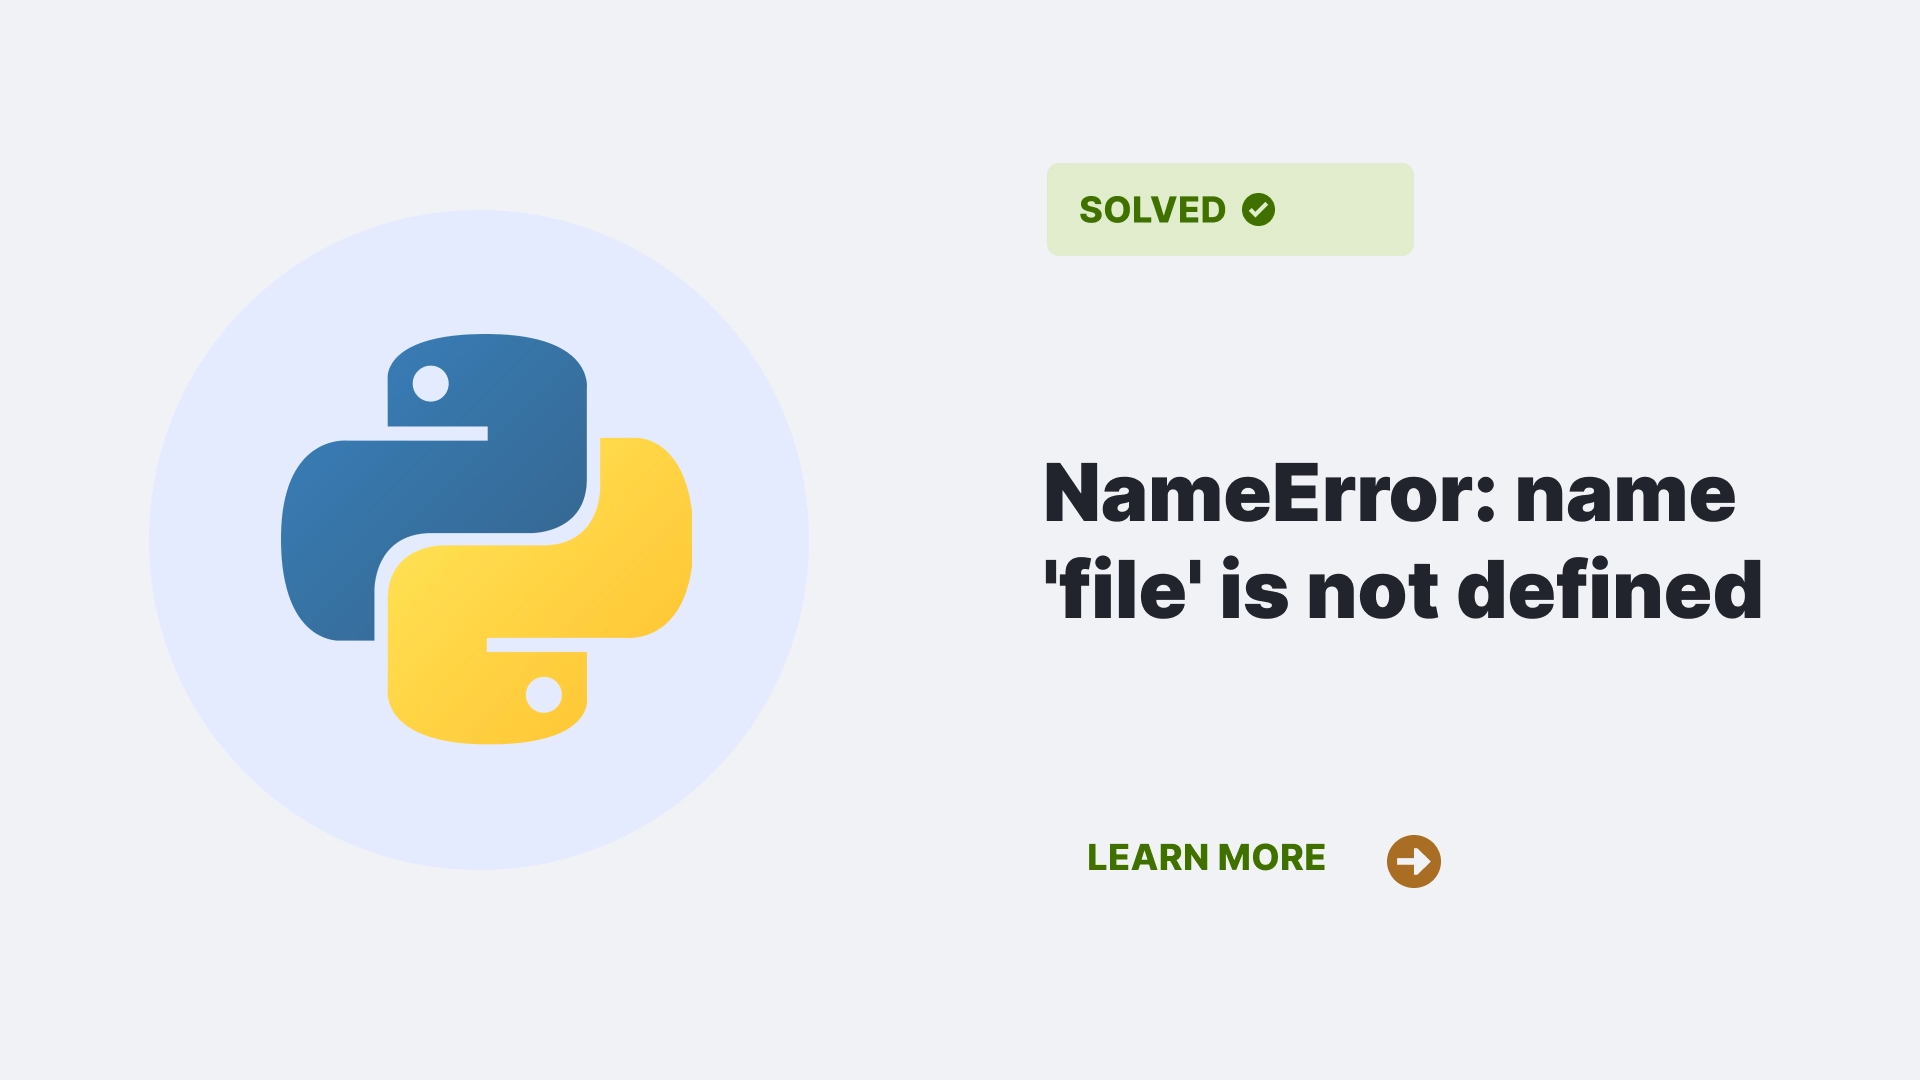 NameError: name 'file' is not defined